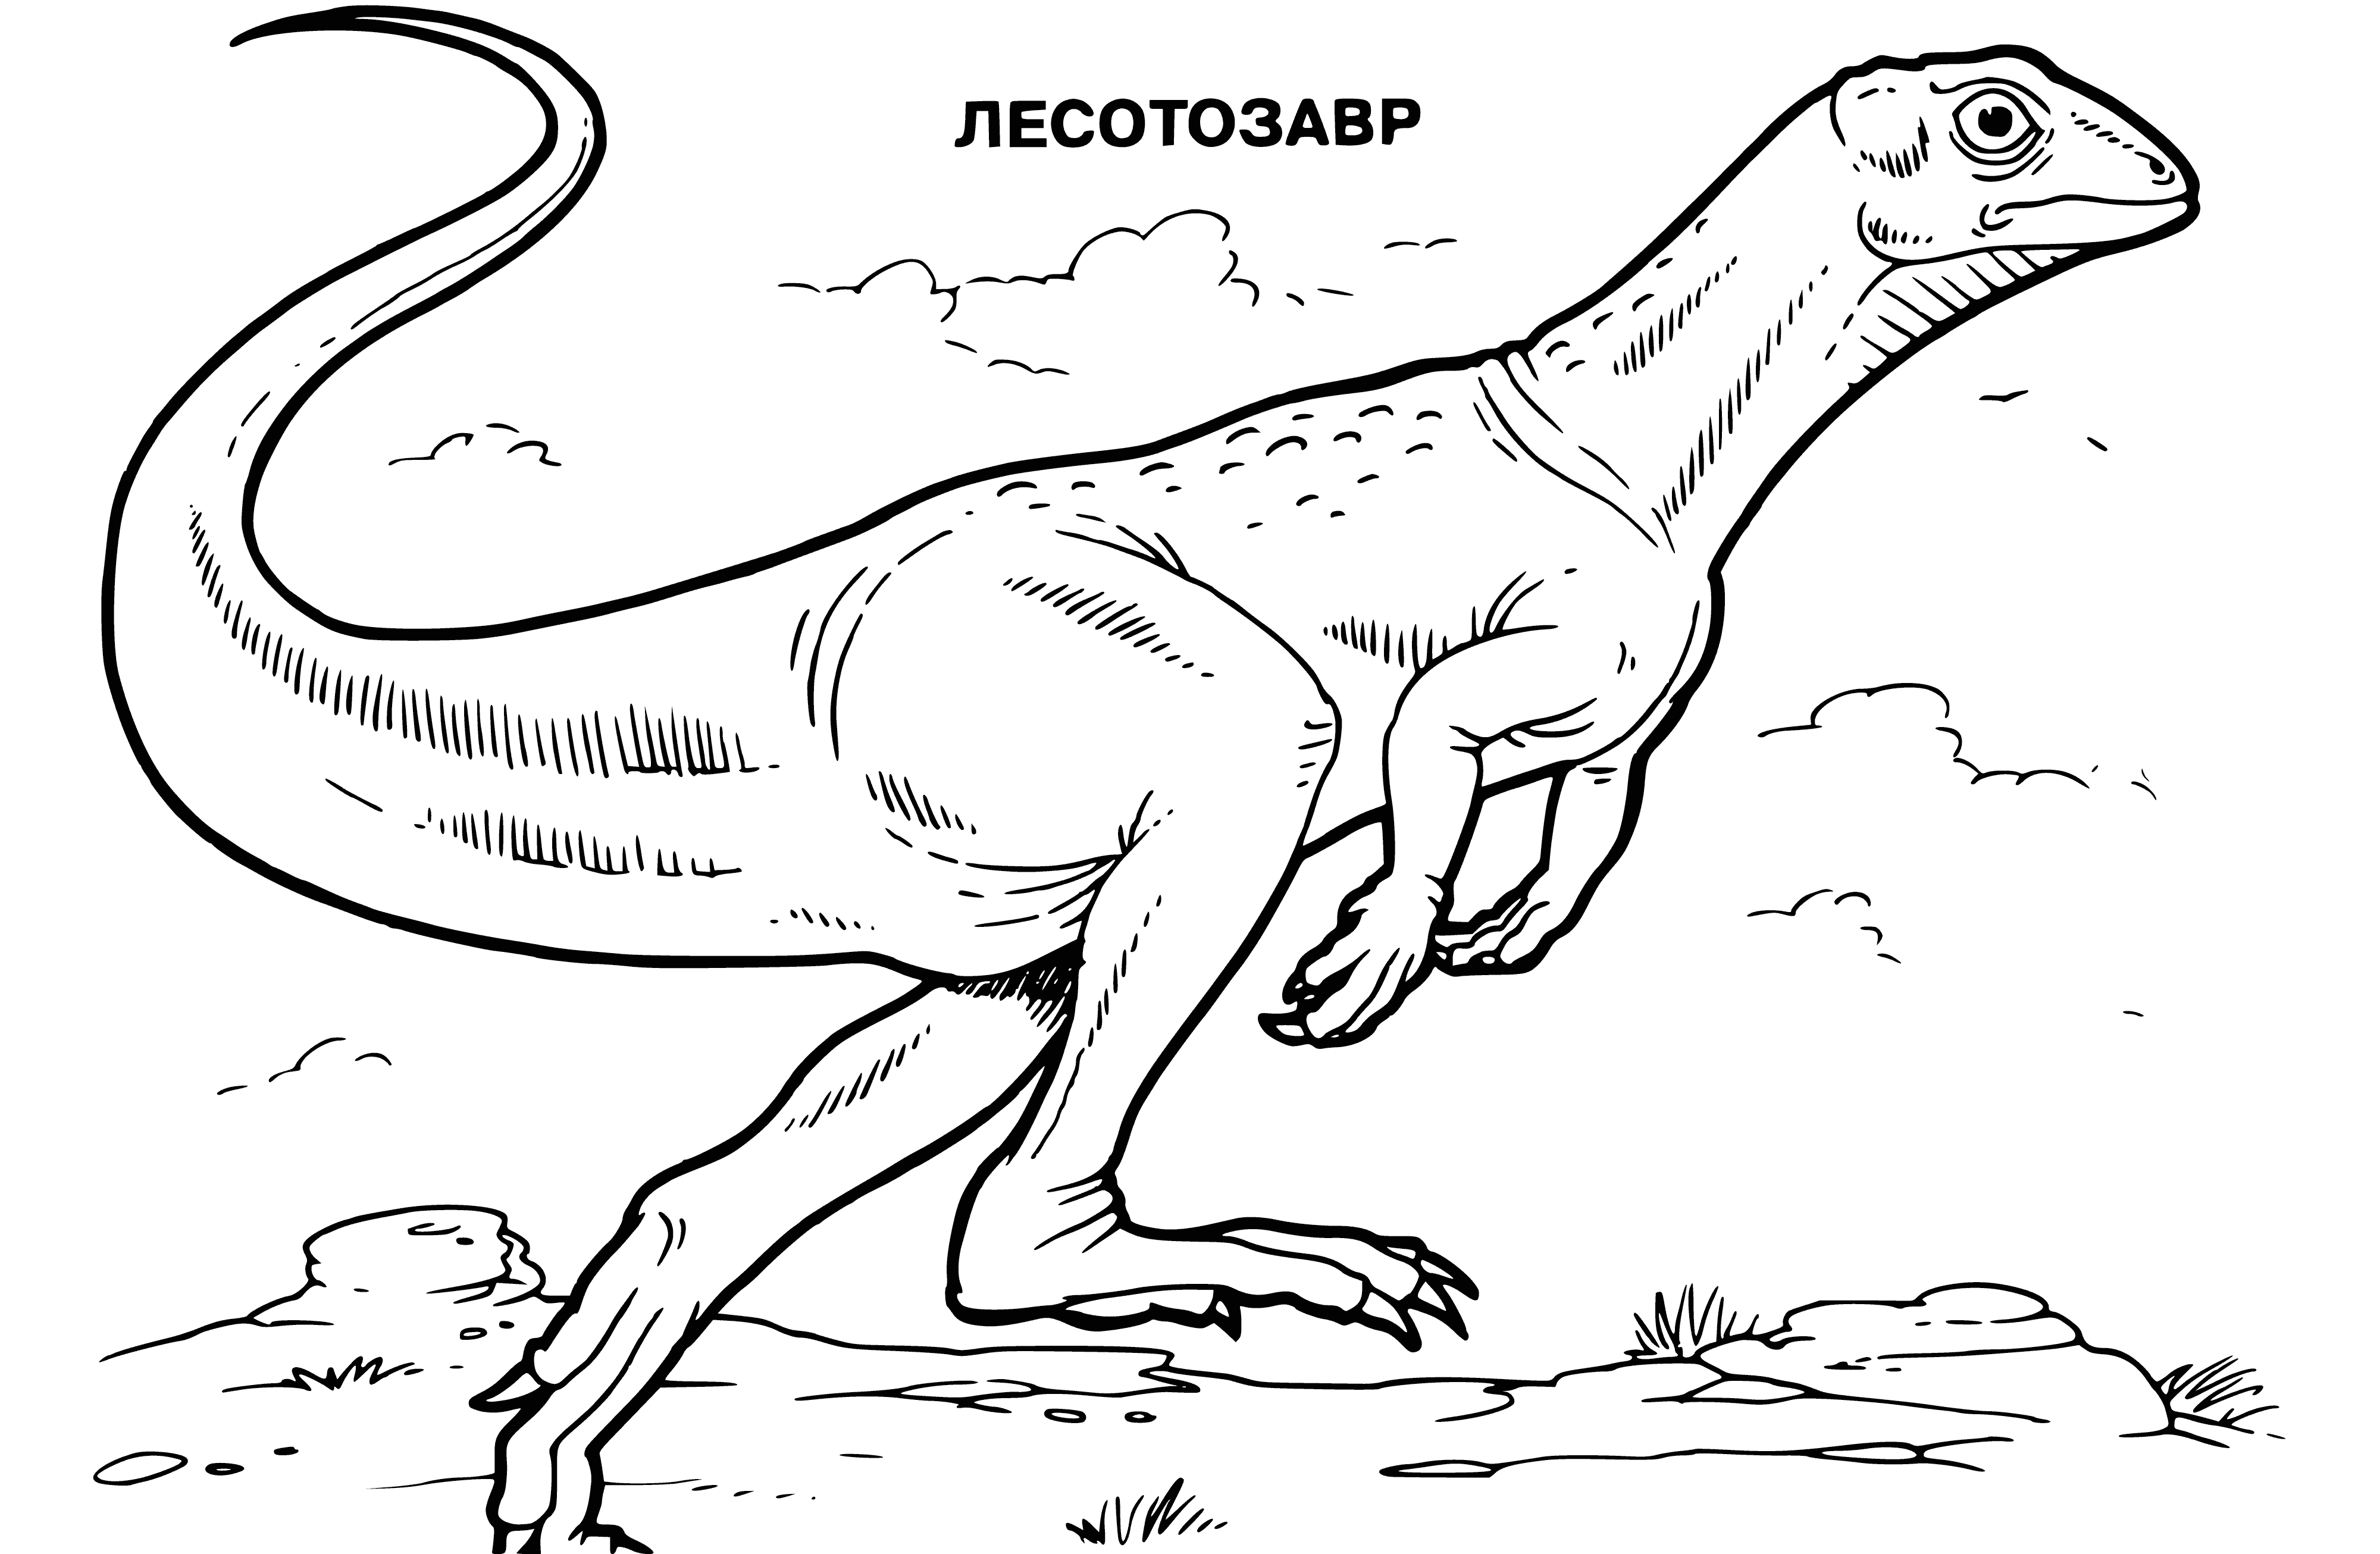 coloring page: A large green dinosaur stands on hind legs; long neck, open mouth, small arms, and tail stretched out behind.